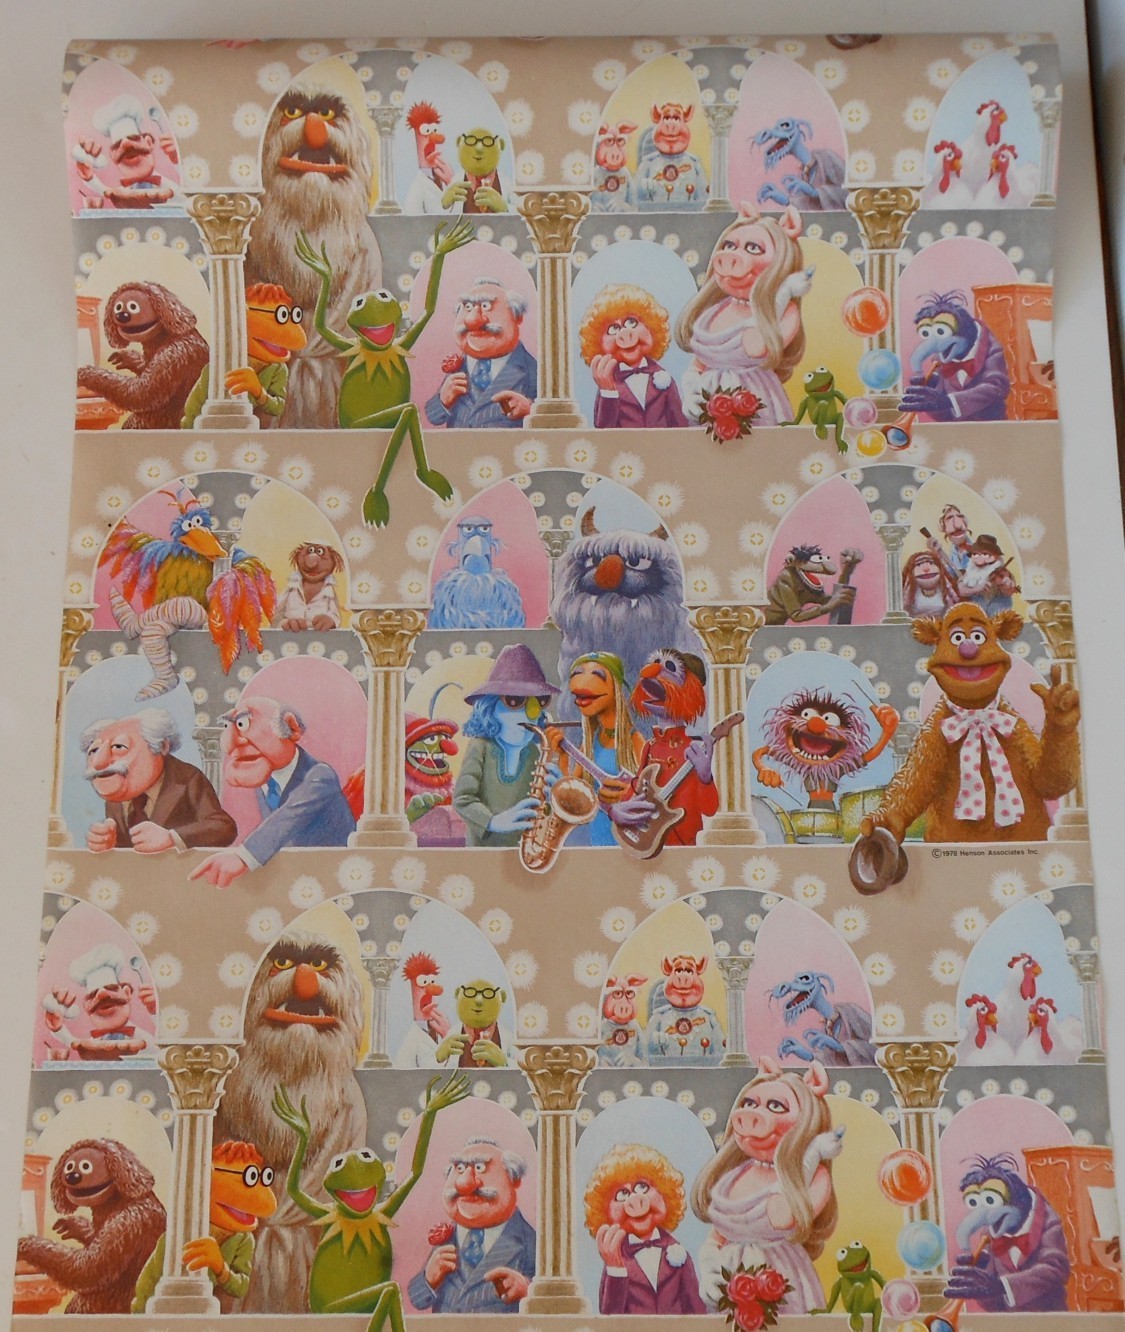 Roll Of Muppet Show Wallpaper The Design Featured Many